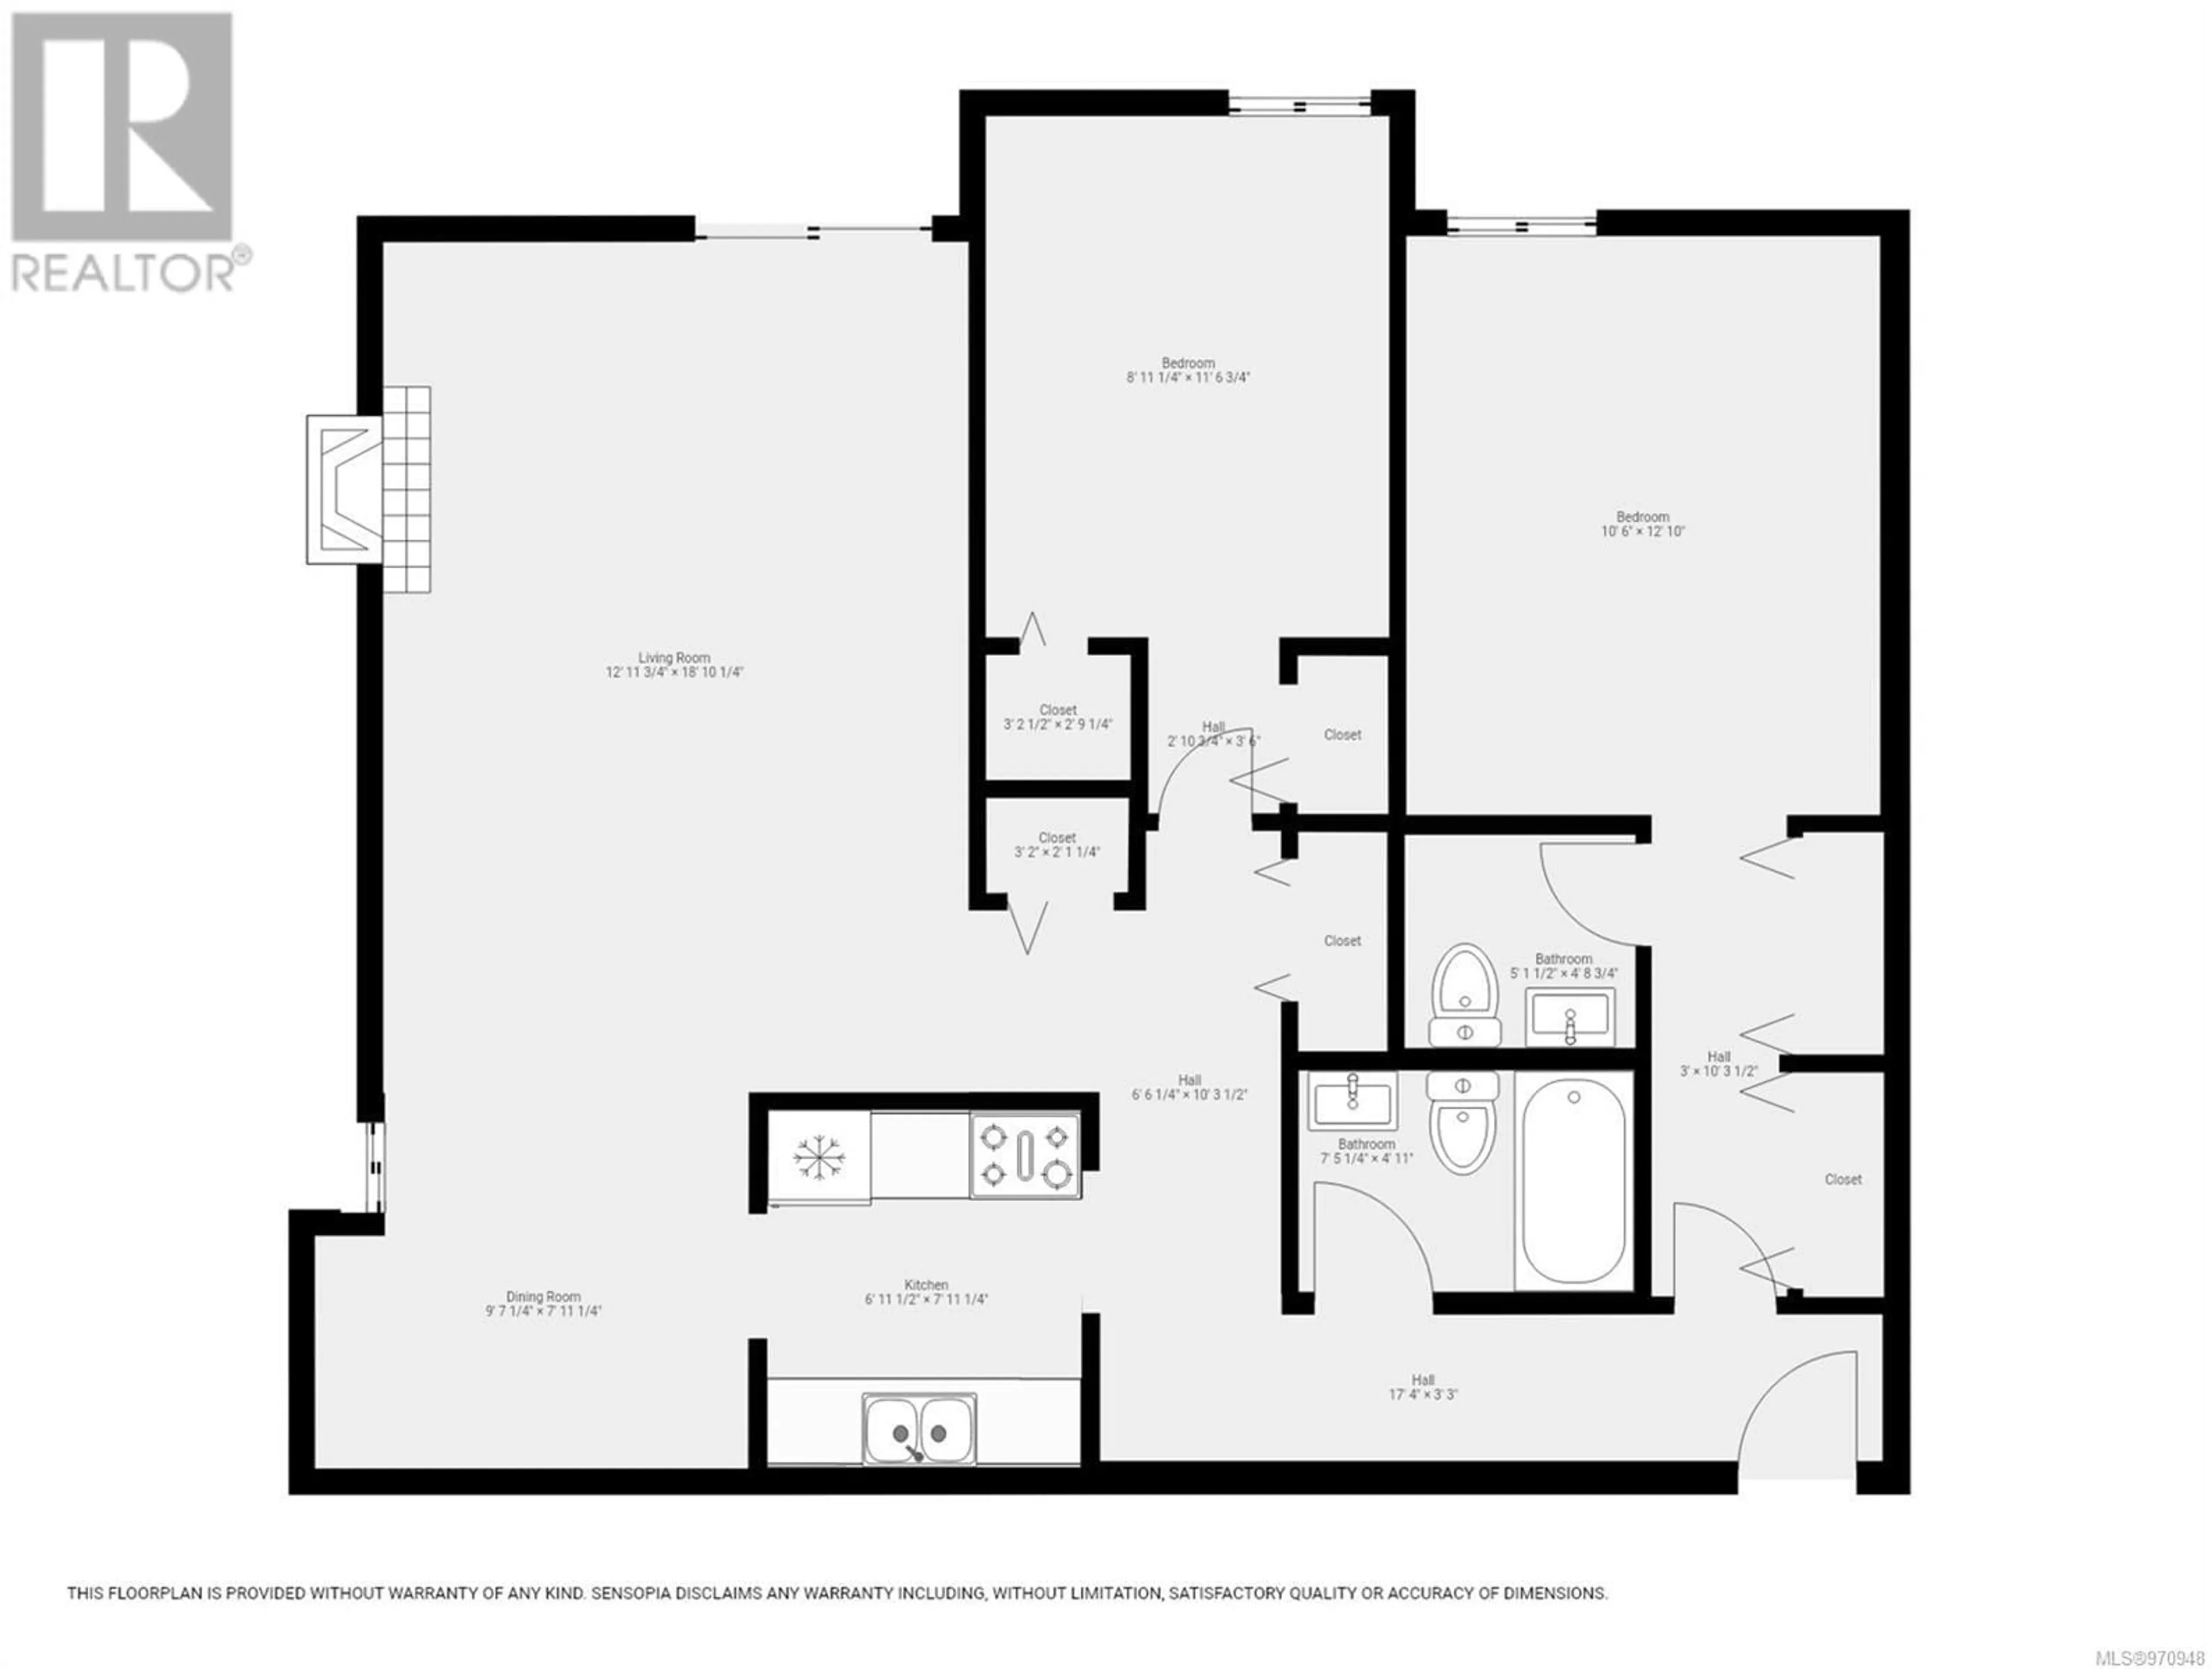 Floor plan for 101 585 Dogwood St S, Campbell River British Columbia V9W6T6